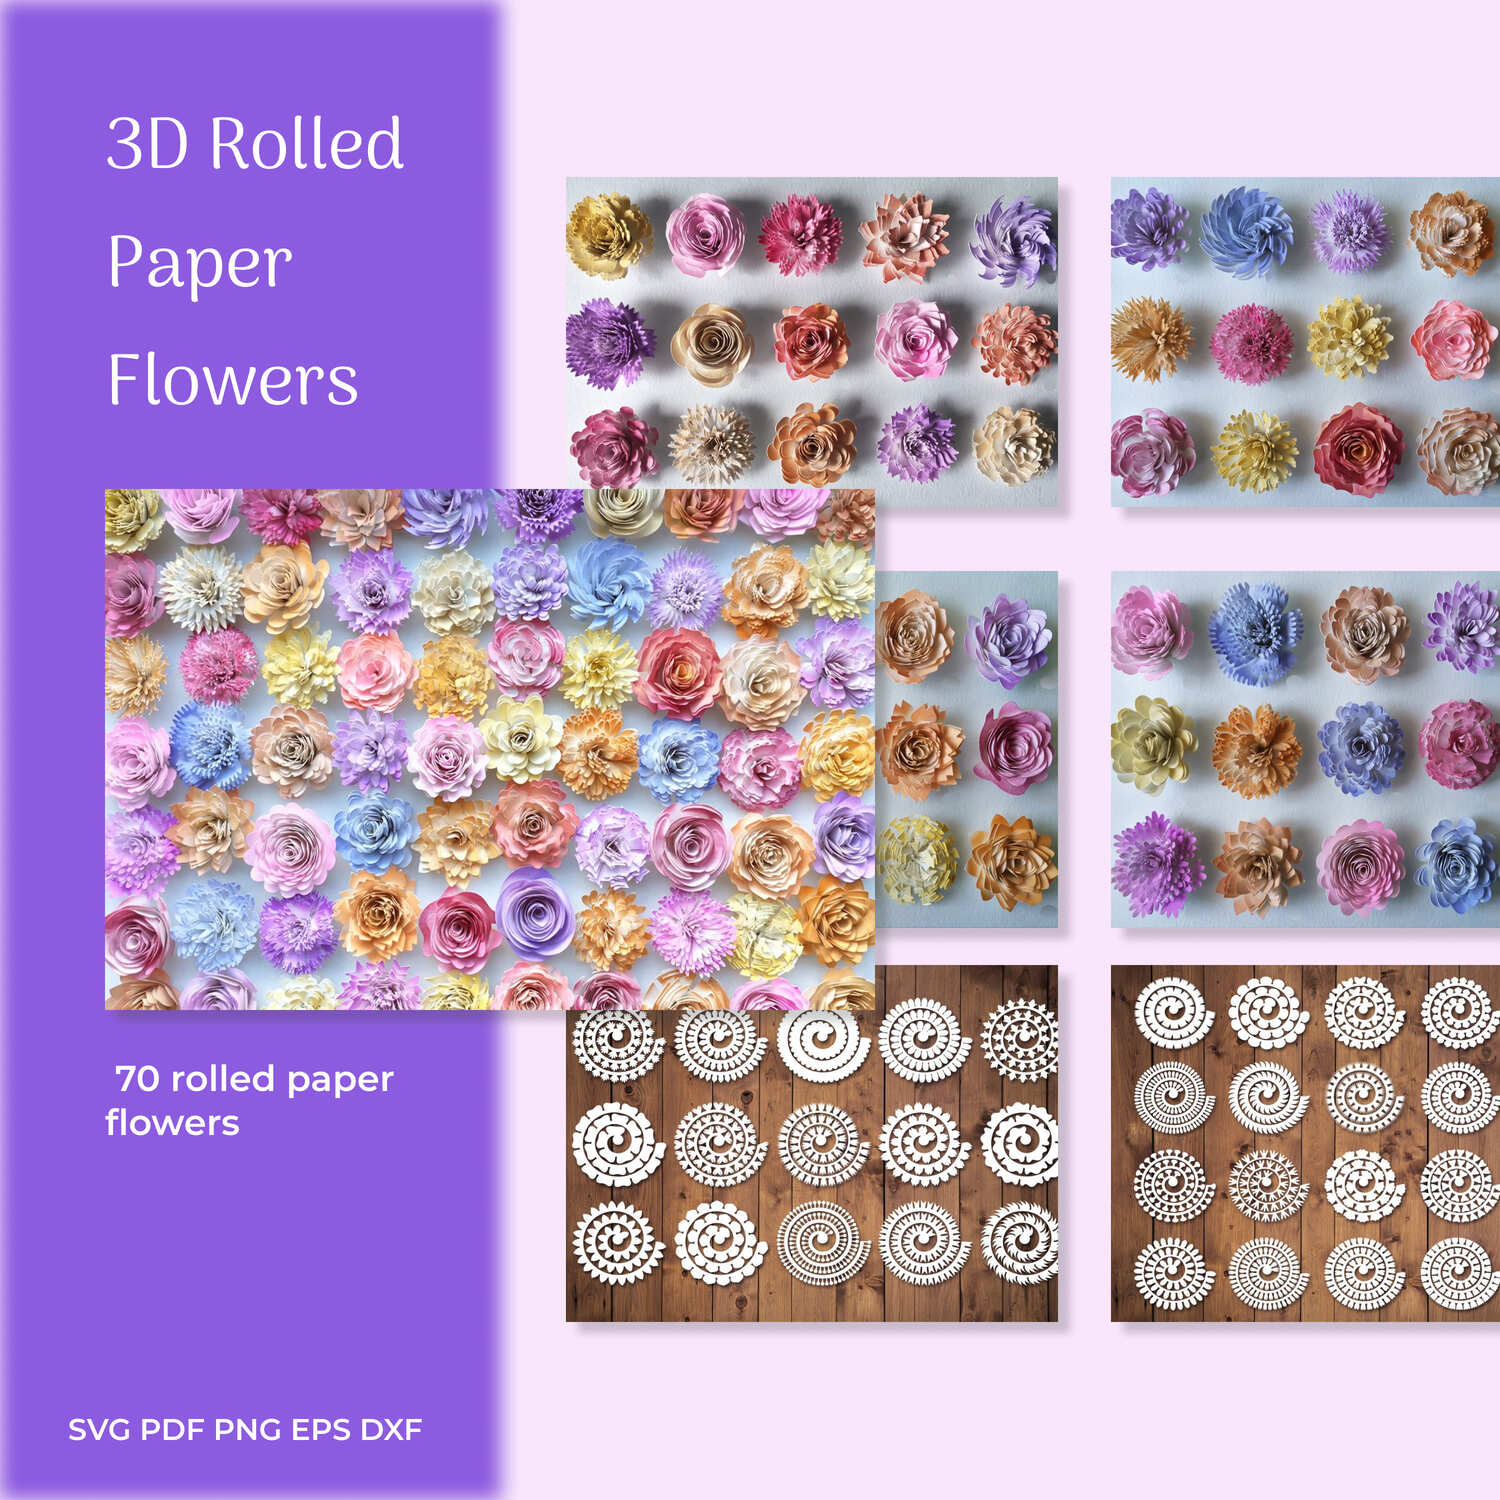 3D Rolled Paper Flowers SVG cover image.